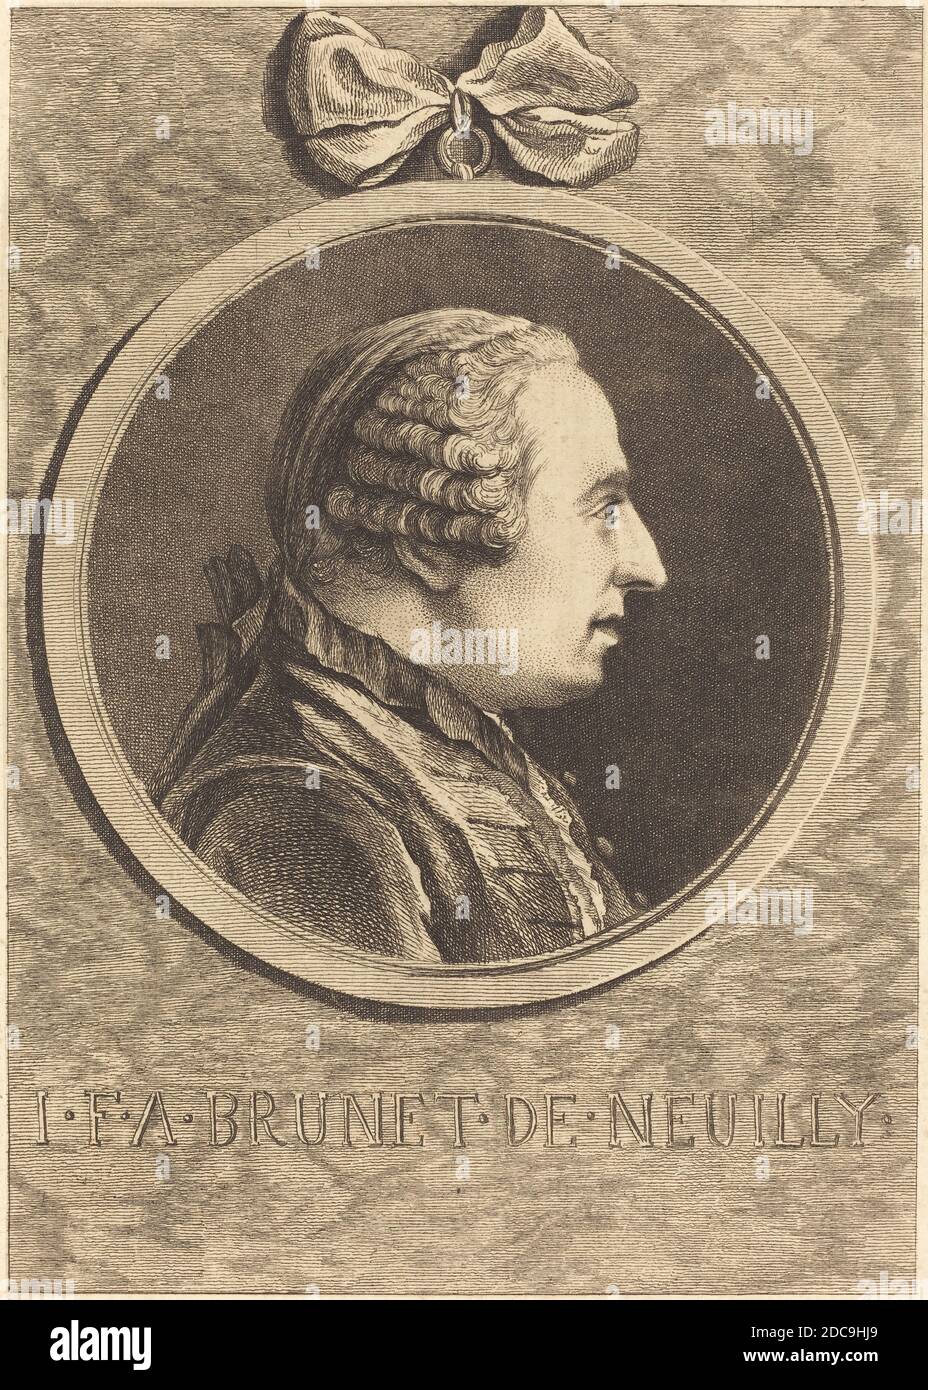 Charles-Nicolas Cochin II, (artist), French, 1715 - 1790, I.F.A. Brunet de Neuilly, etching on laid paper, sheet (trimmed within plate mark): 19.6 x 14.5 cm (7 11/16 x 5 11/16 in Stock Photo